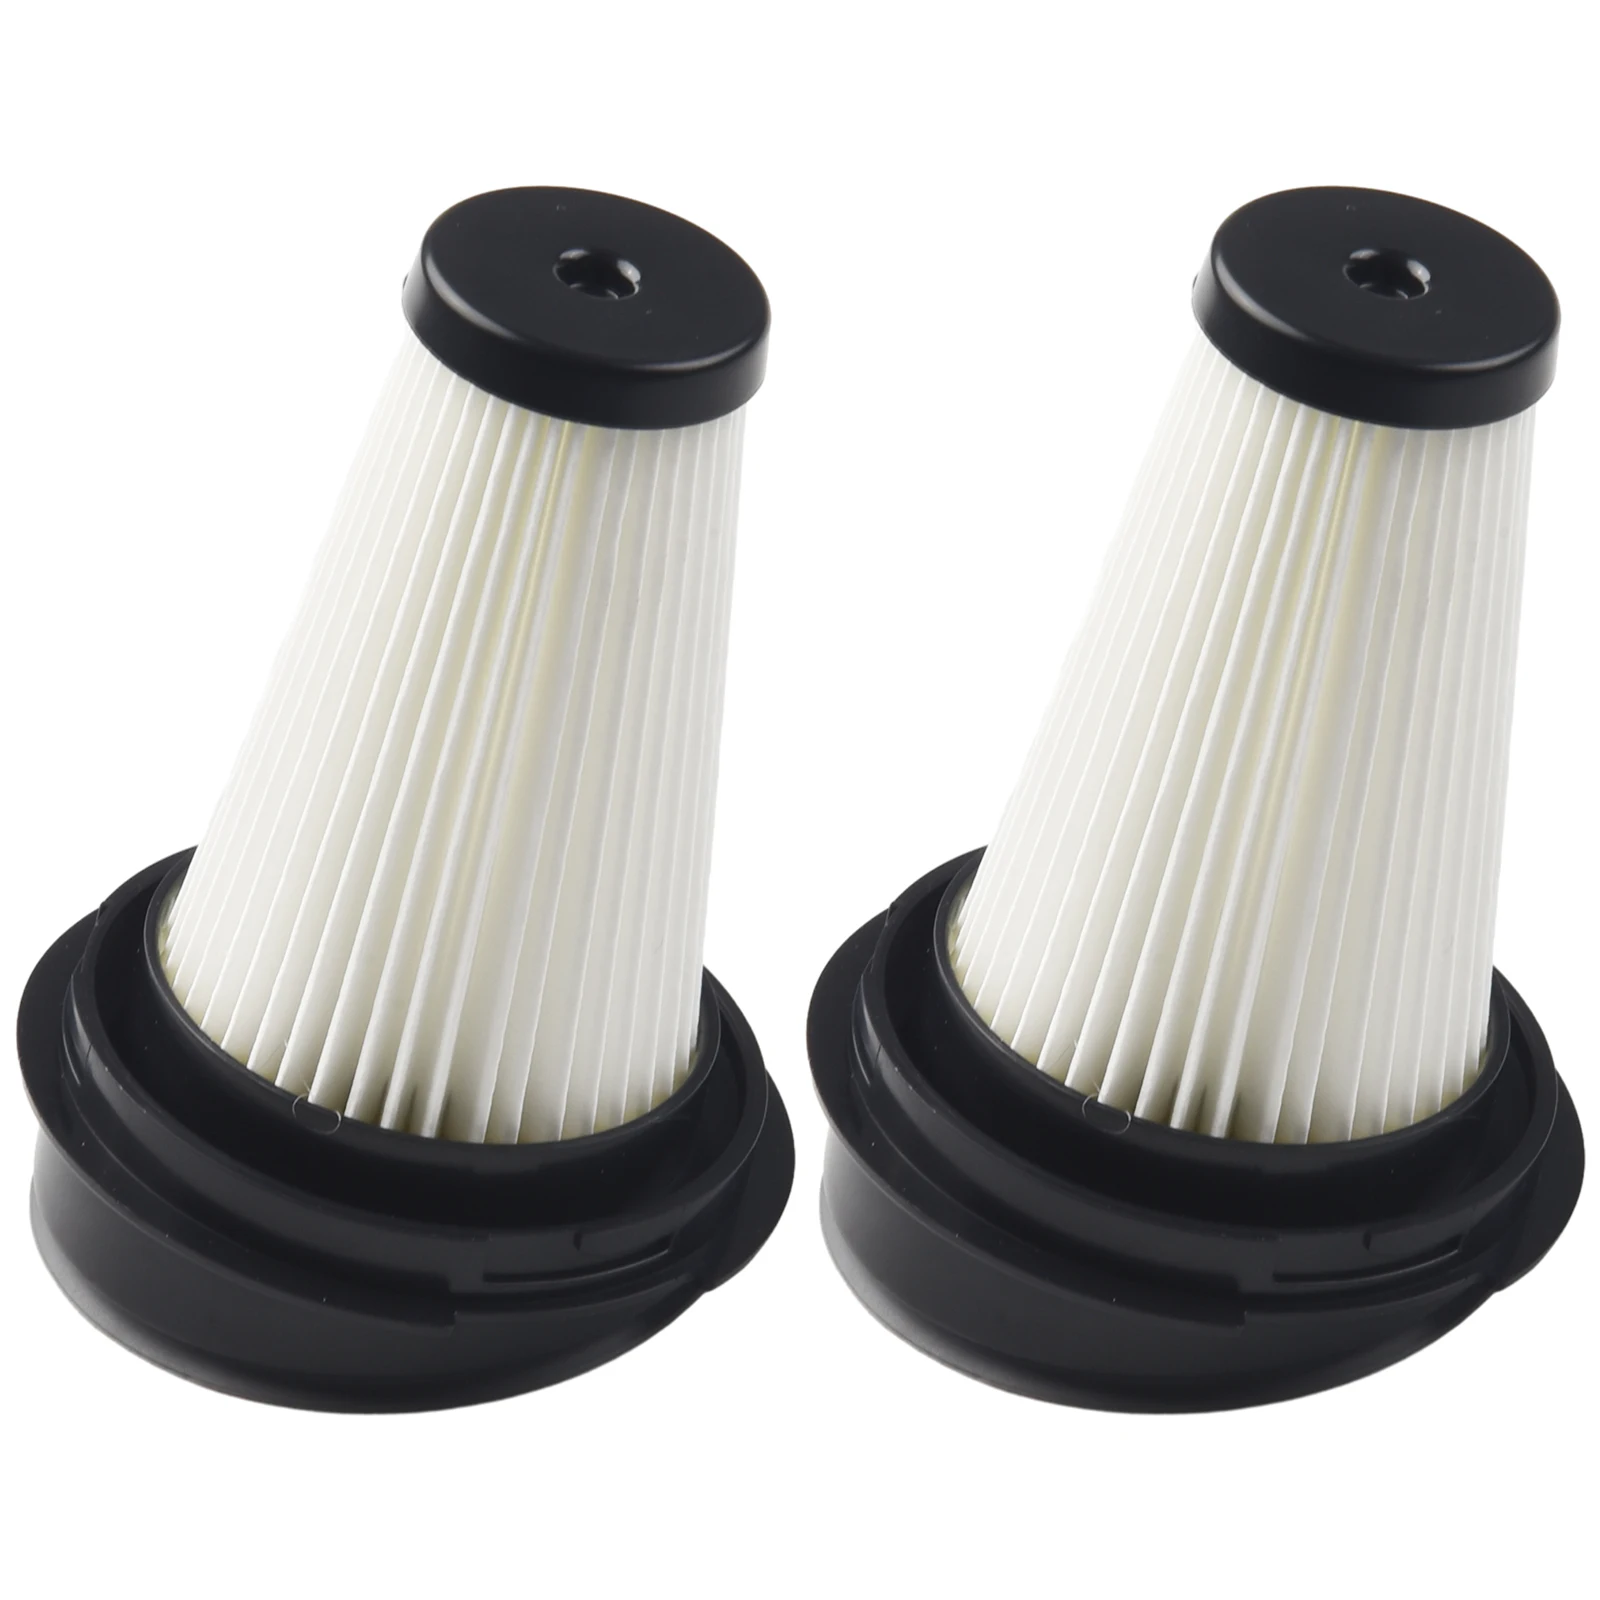 

Breathe Easy and Keep Your Vacuum Cleaner Running Smoothly with 2pcs Filters for BEKO VRT61821 VRT61818 VRT61814